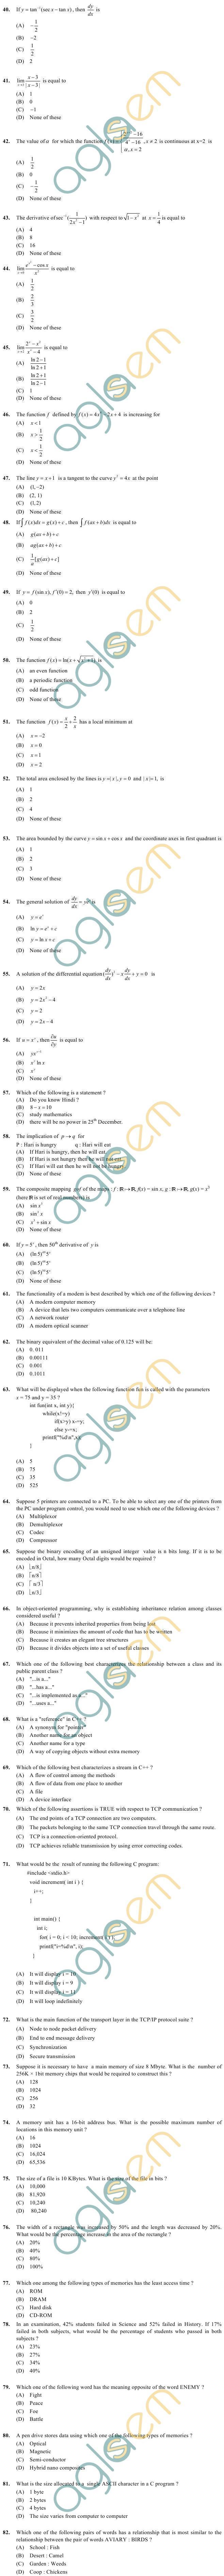 OJEE 2013 Question Paper for LE MCA